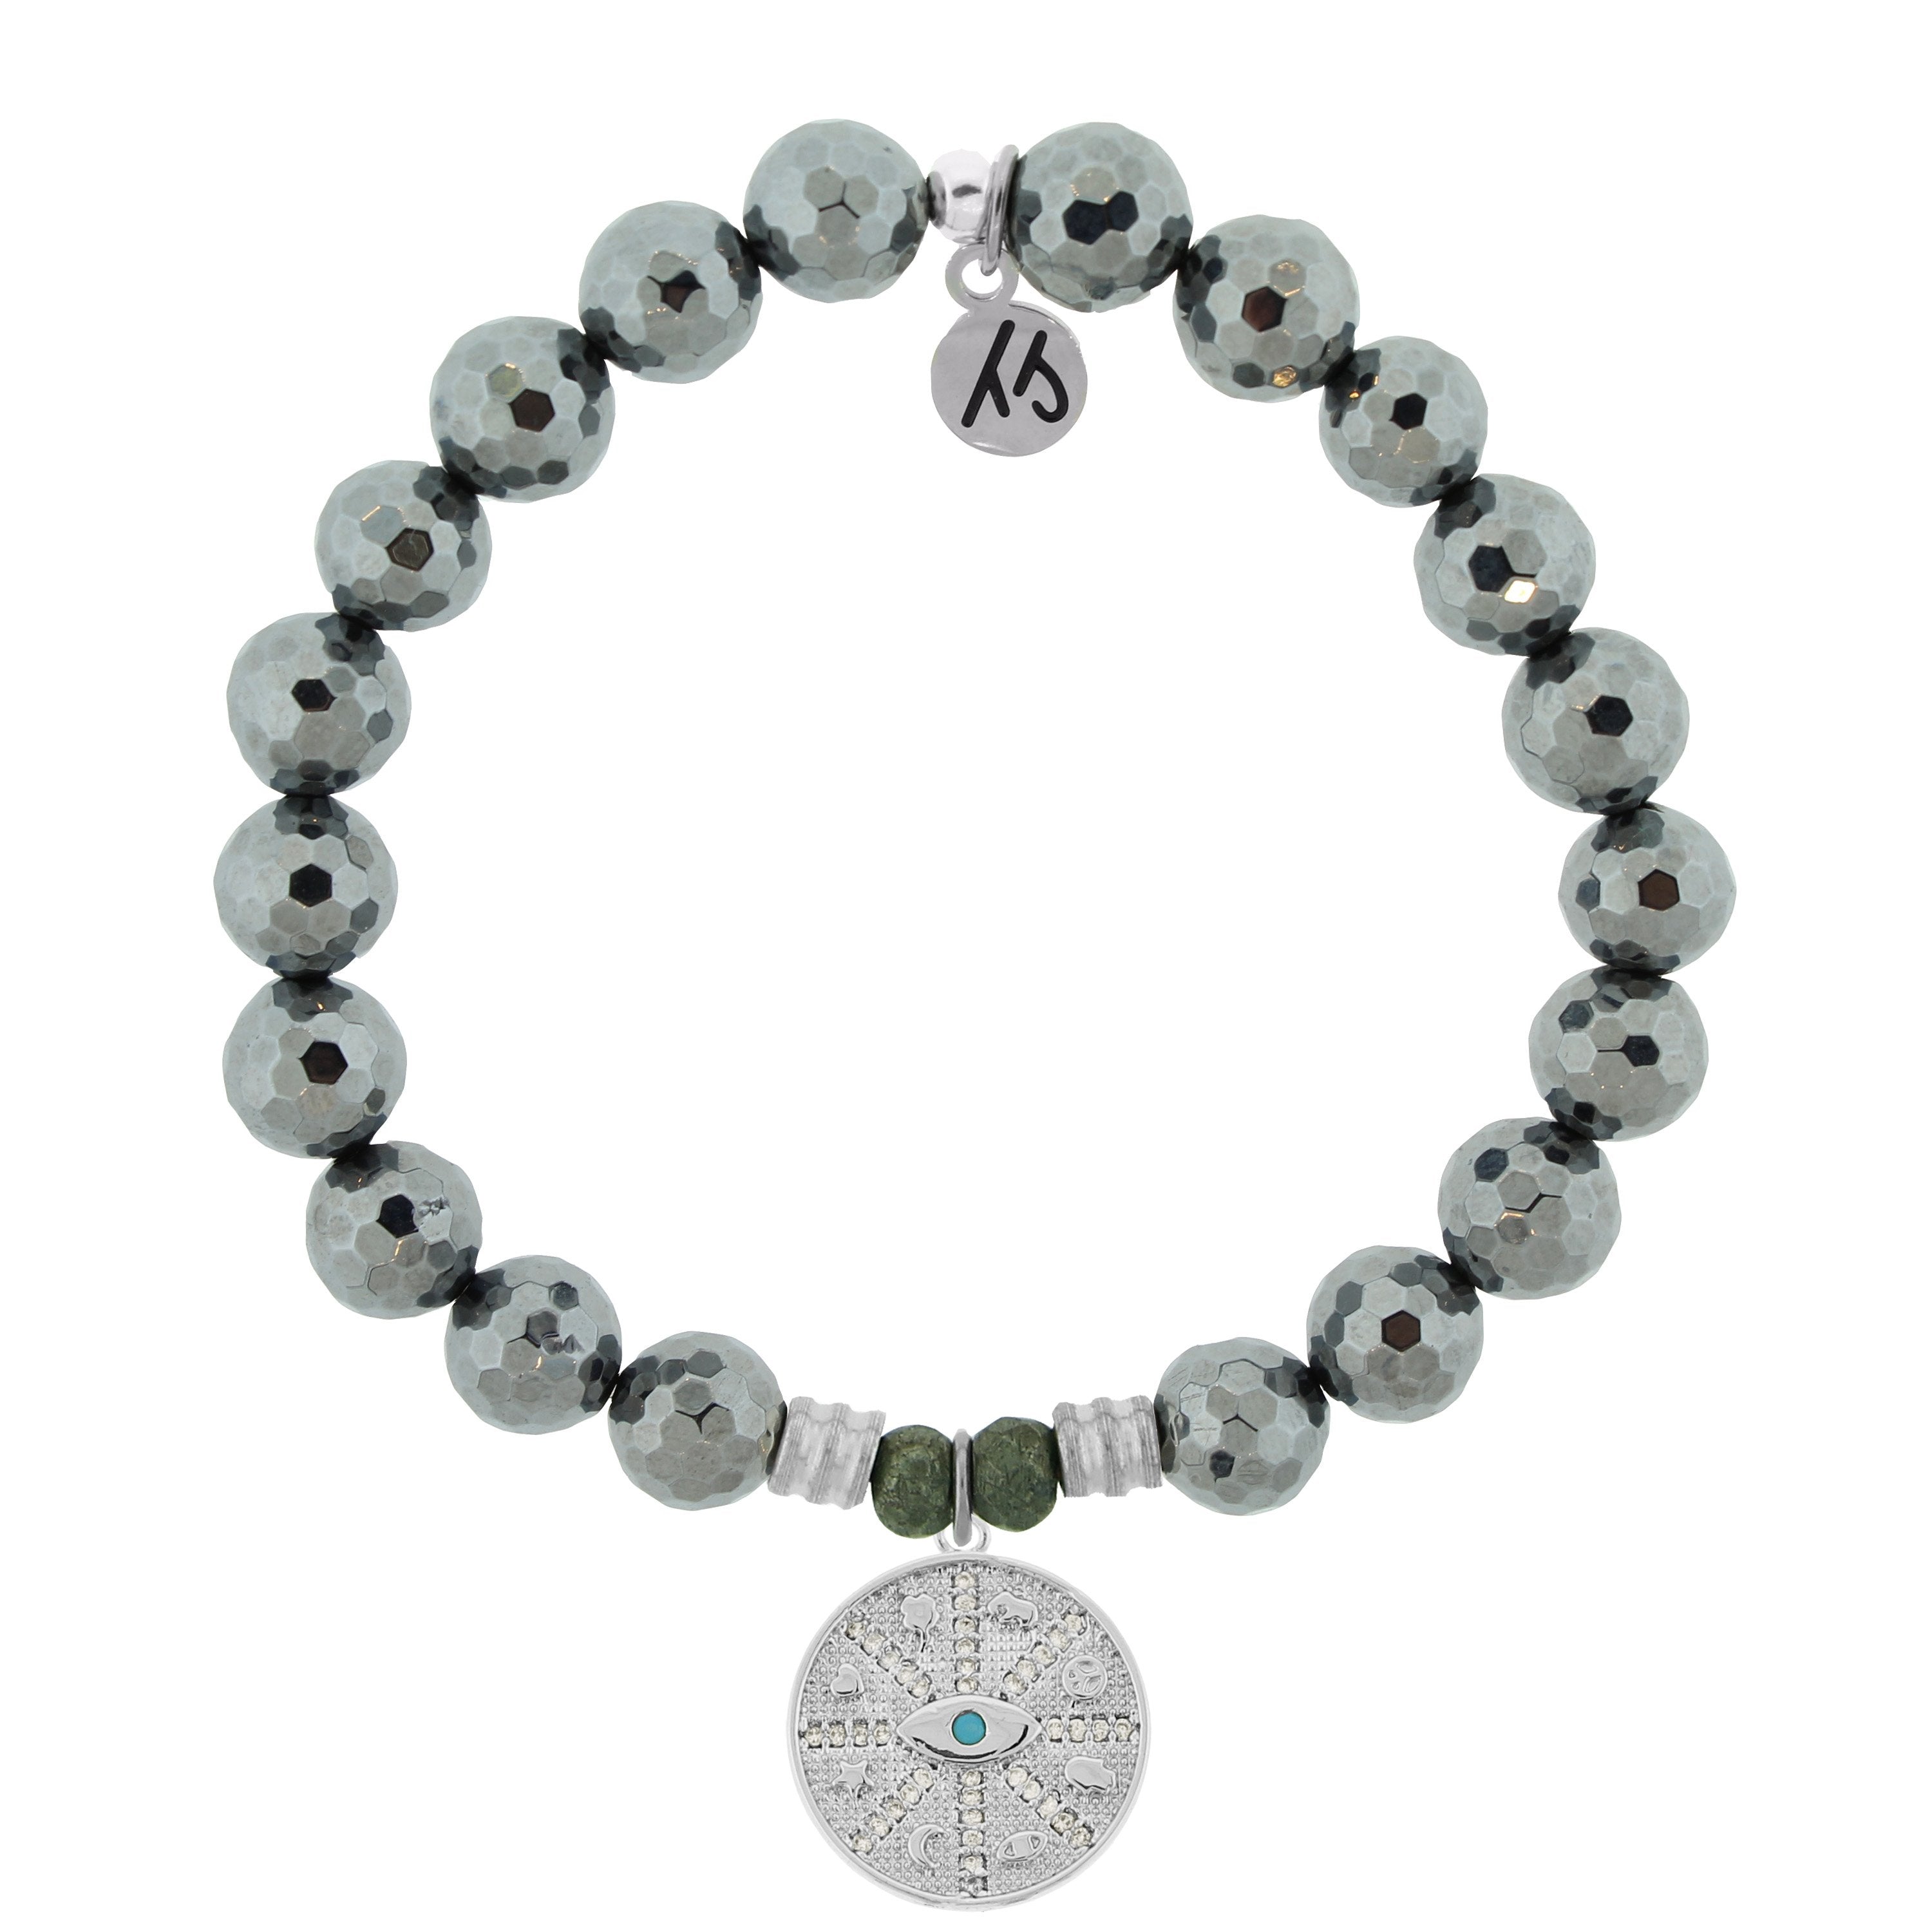 Buy Nazar Protection Miracle Bracelet Online From Premium Crystal Store at  Best Price - The Miracle Hub